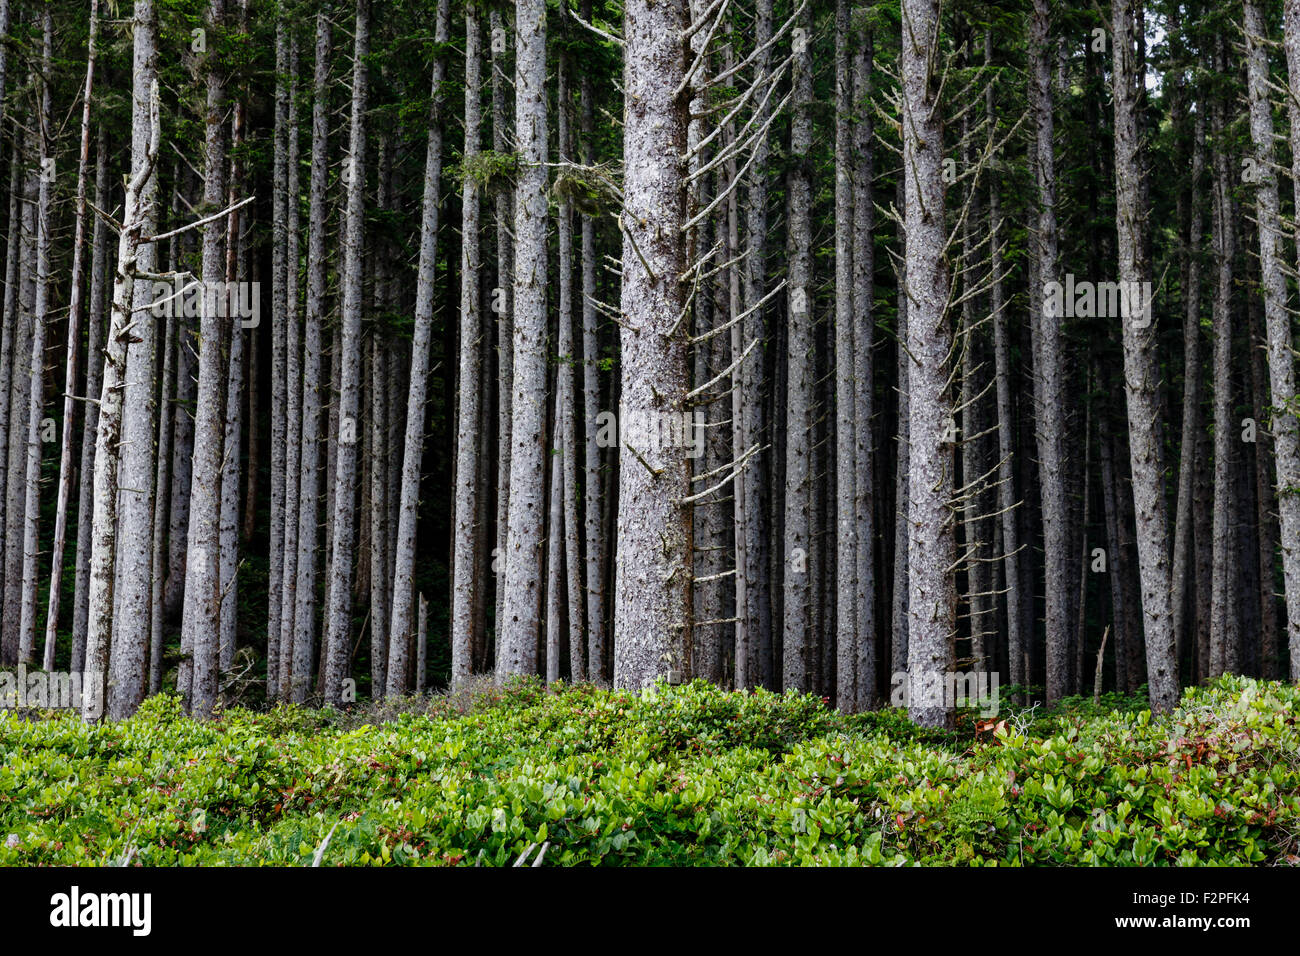 Tall straight pine trees rise along the edge of woods Stock Photo - Alamy